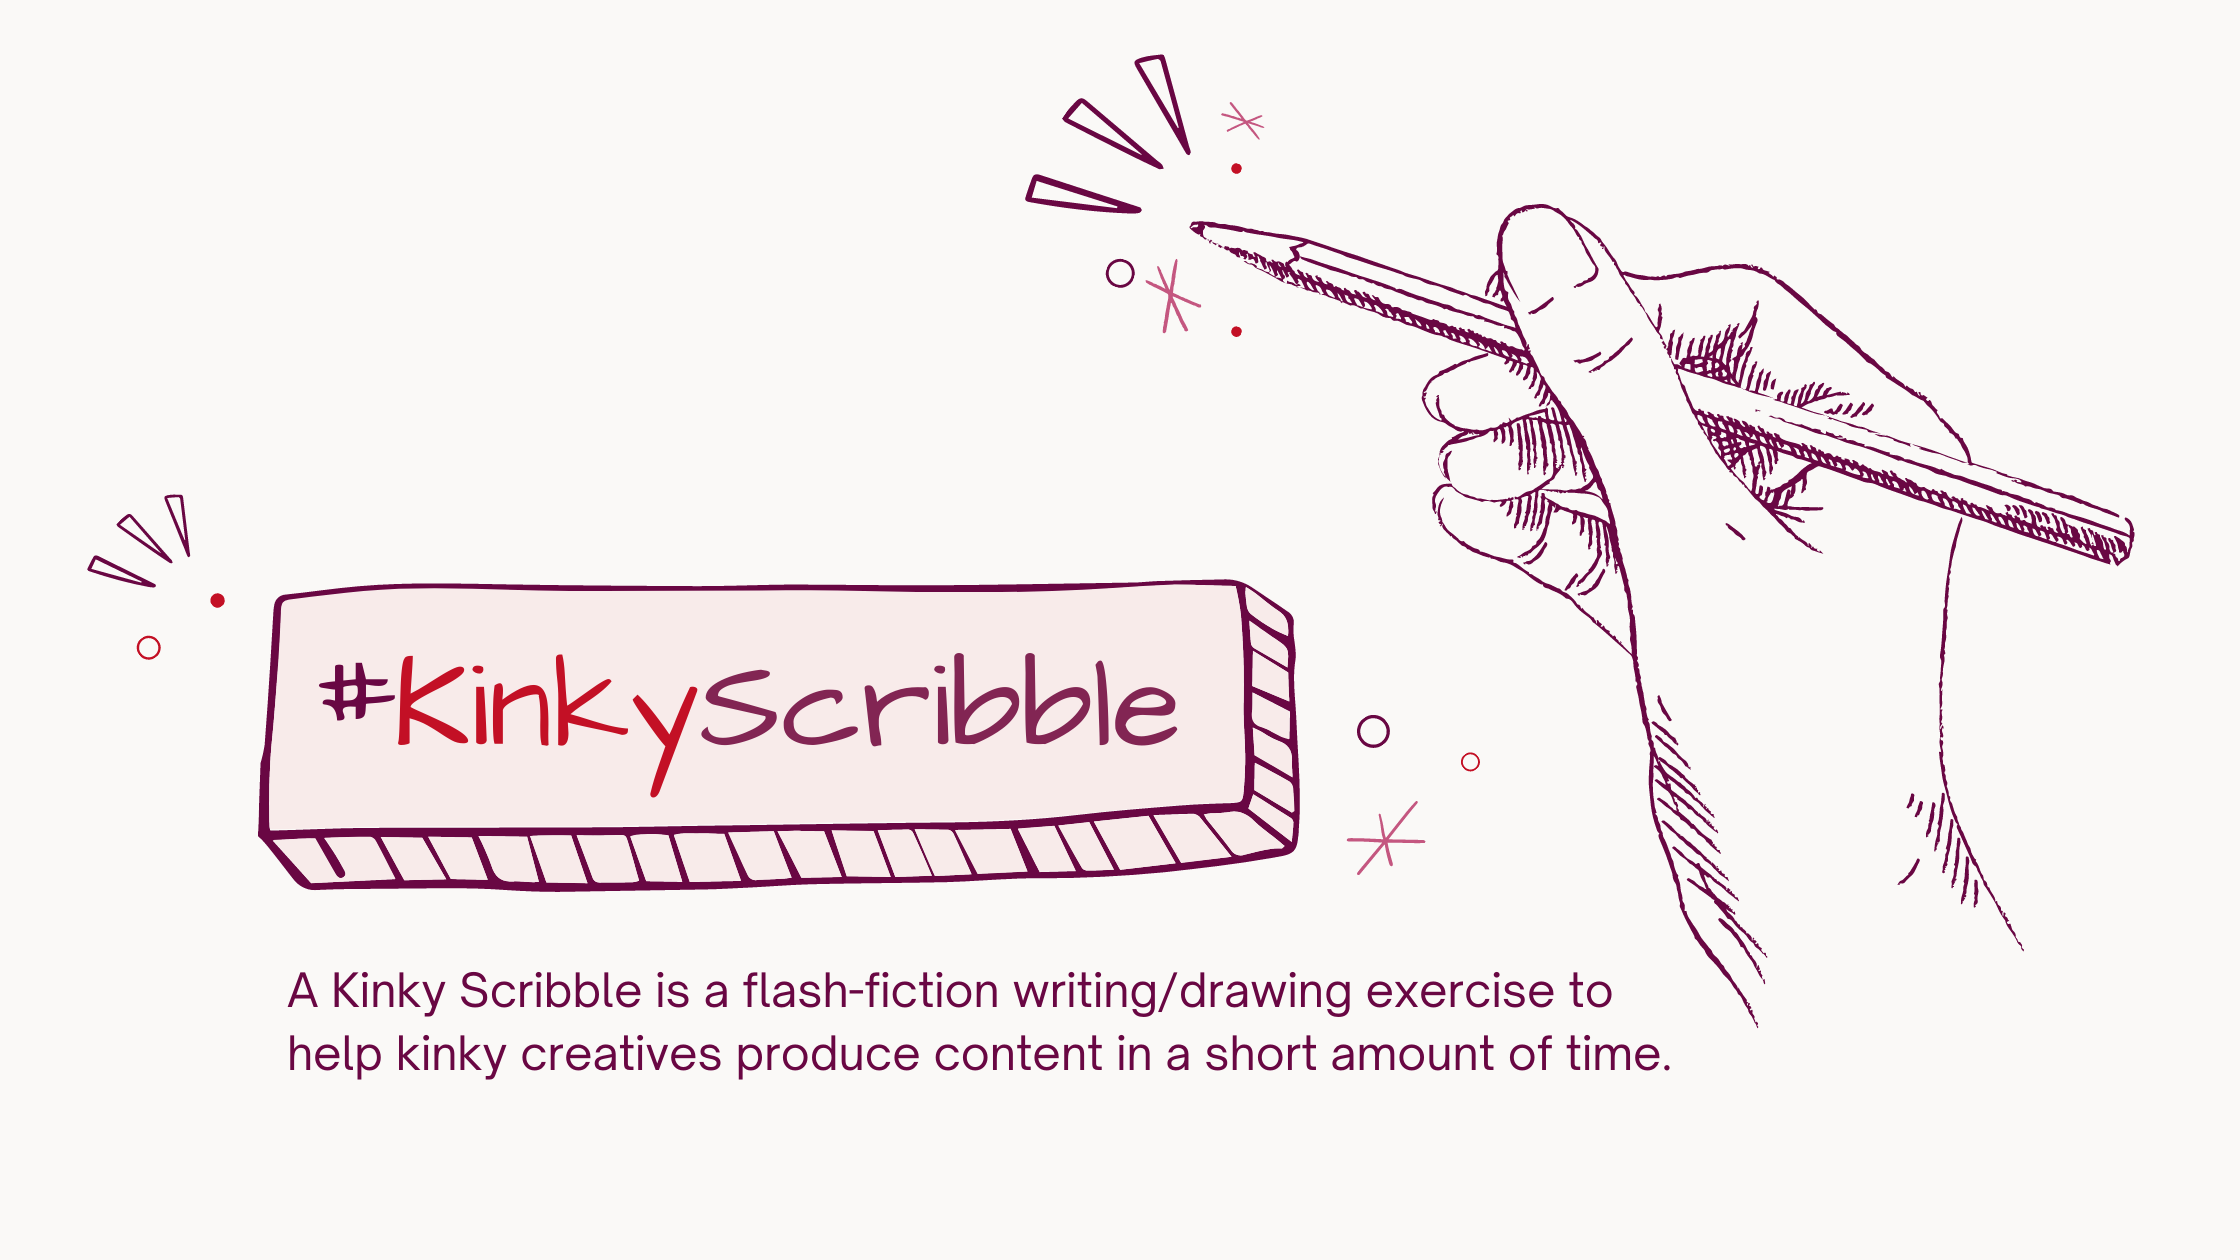 A sketch of a hand holding a pencil drawing abstract shapes. Text reads #KinkyScribble, A Kinky Scribble is a flash-fiction writing/drawing exercise to help kinky creatives produce content in a short amount of time.